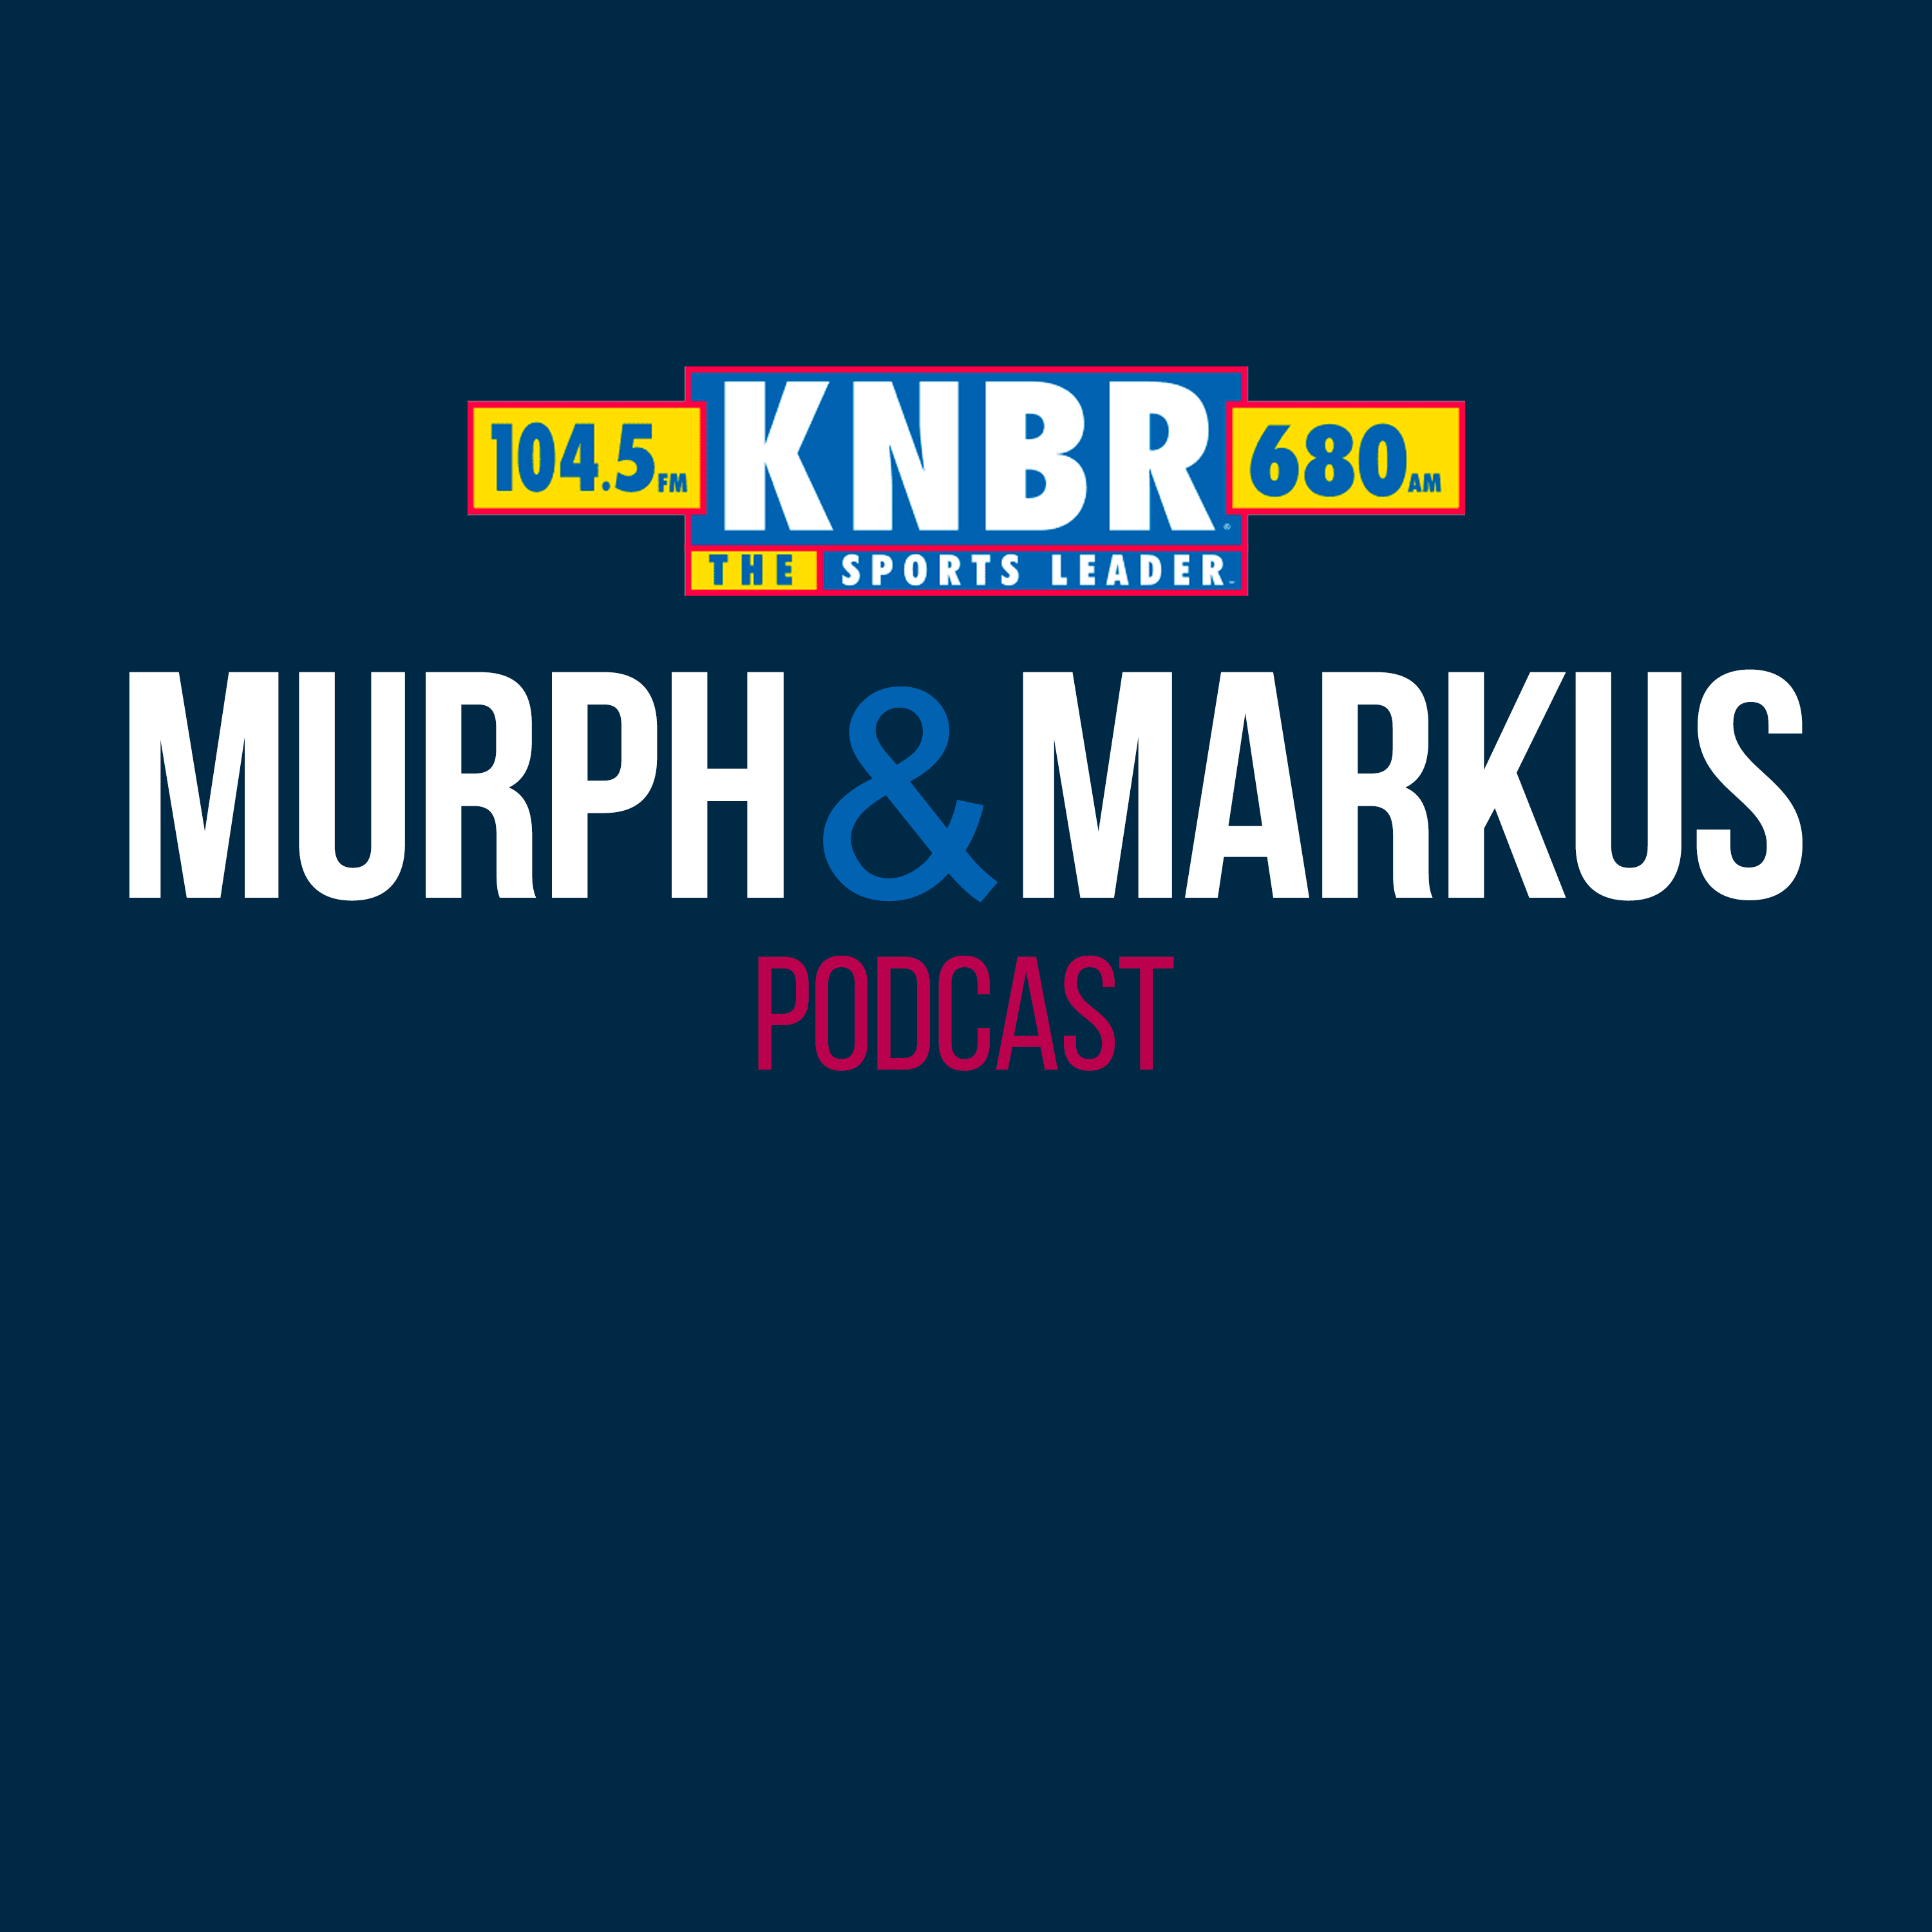 6-25 Hour 1: Murph & Markus are back together again! The guys react to the Giants first win since Willie Mays passed away, Ryan Clark's comments about Brandon Aiyuk, and the best quotes from Mike Dunleavy Jr.'s press conference yesterday